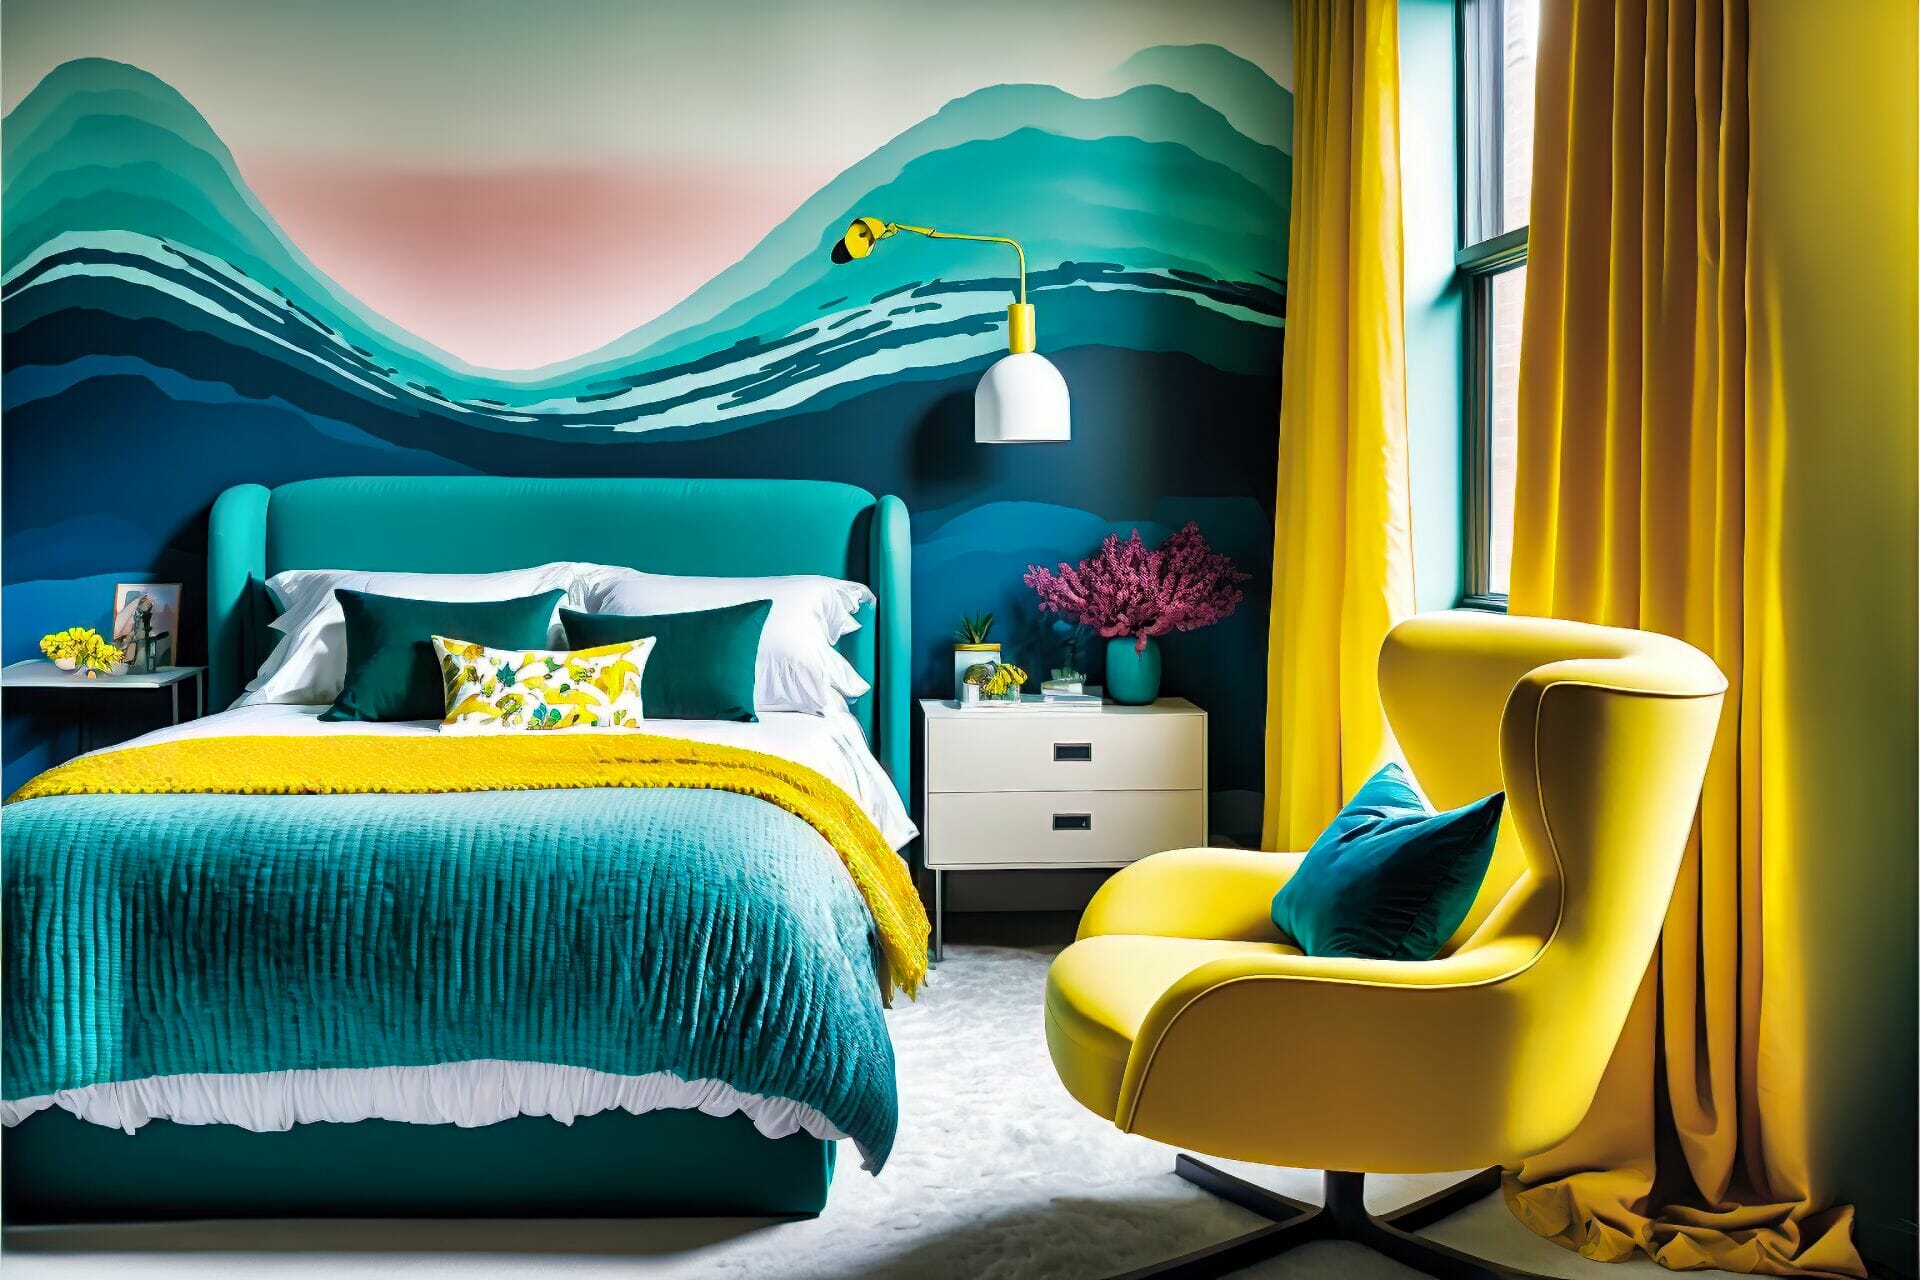 Mid-Century Modern Bedroom – A Playful Modern Bedroom Featuring A Teal Bed Frame With A Graphic Print Bedspread, A Bright Yellow Armchair, And An Ombre Wall Mural.